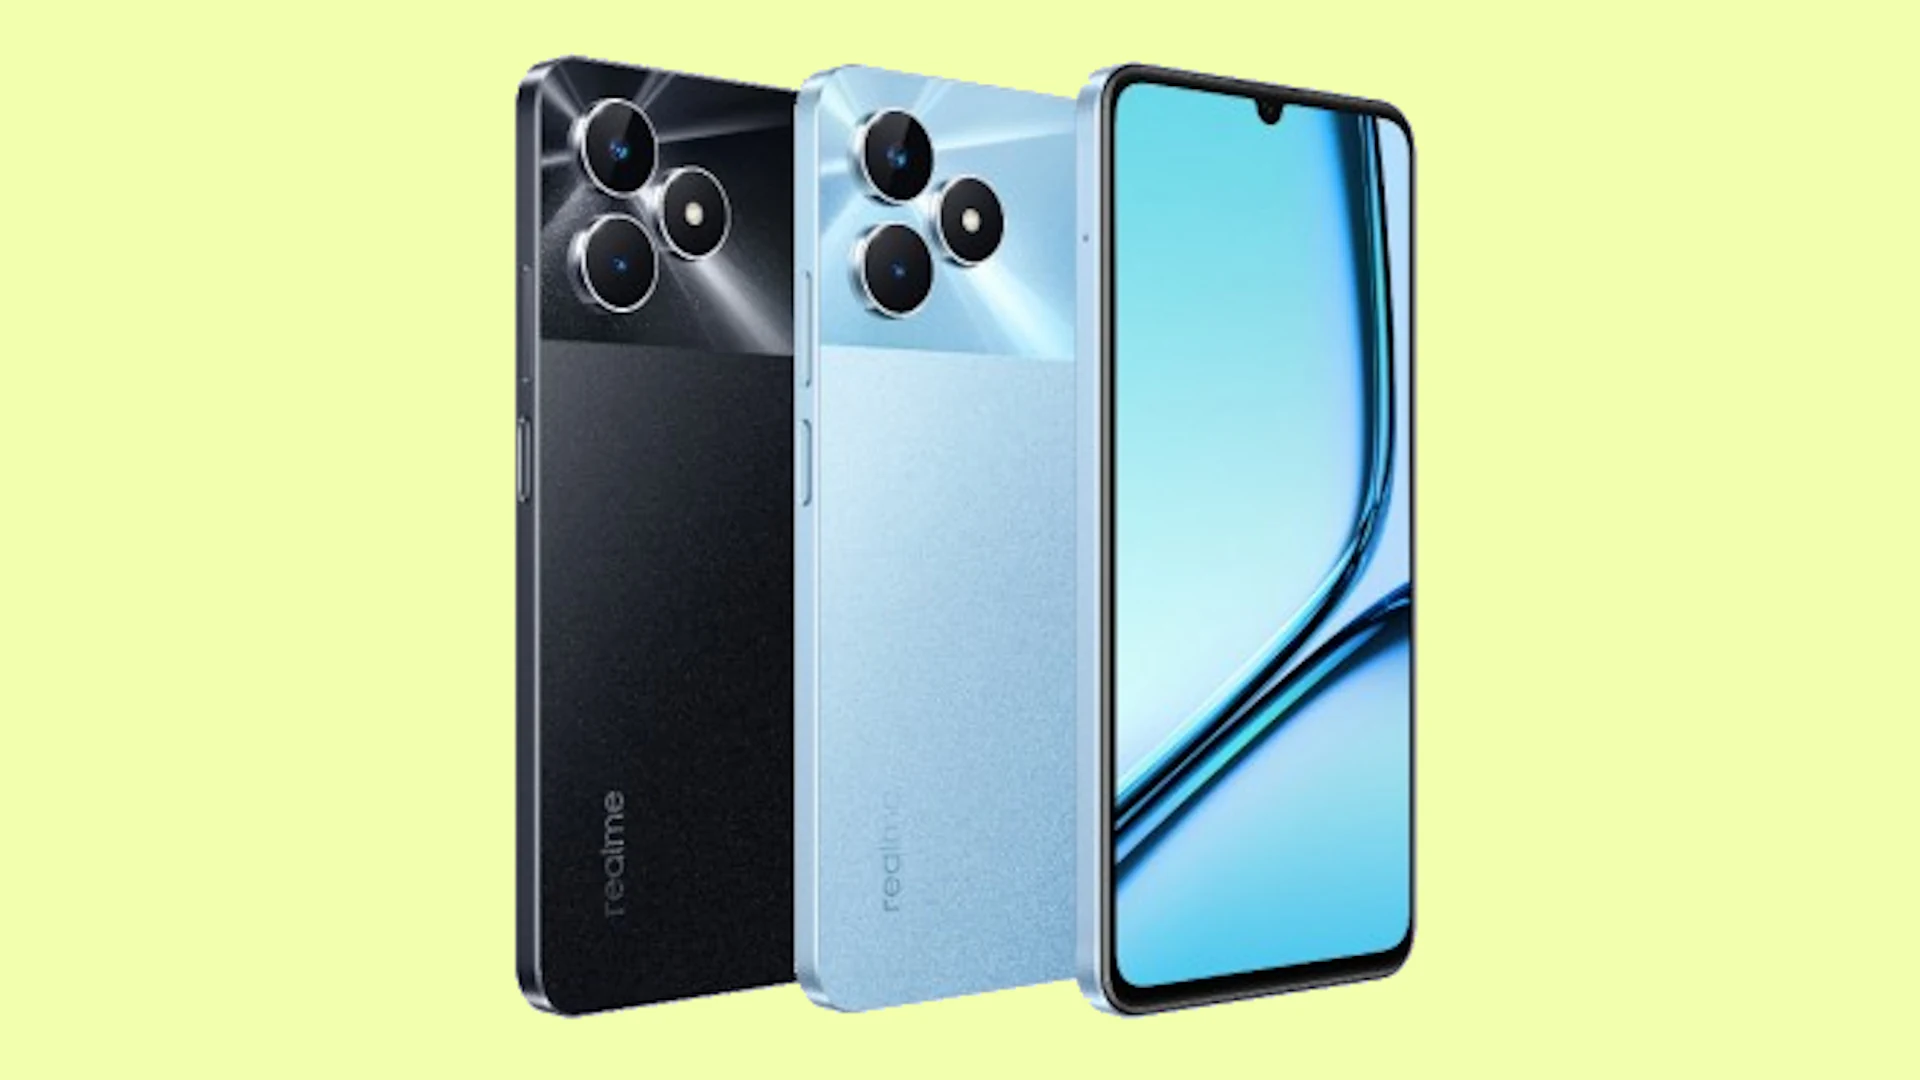 The Realme Note 50 is a new phone from a Chinese company that costs $64 in the Philippines